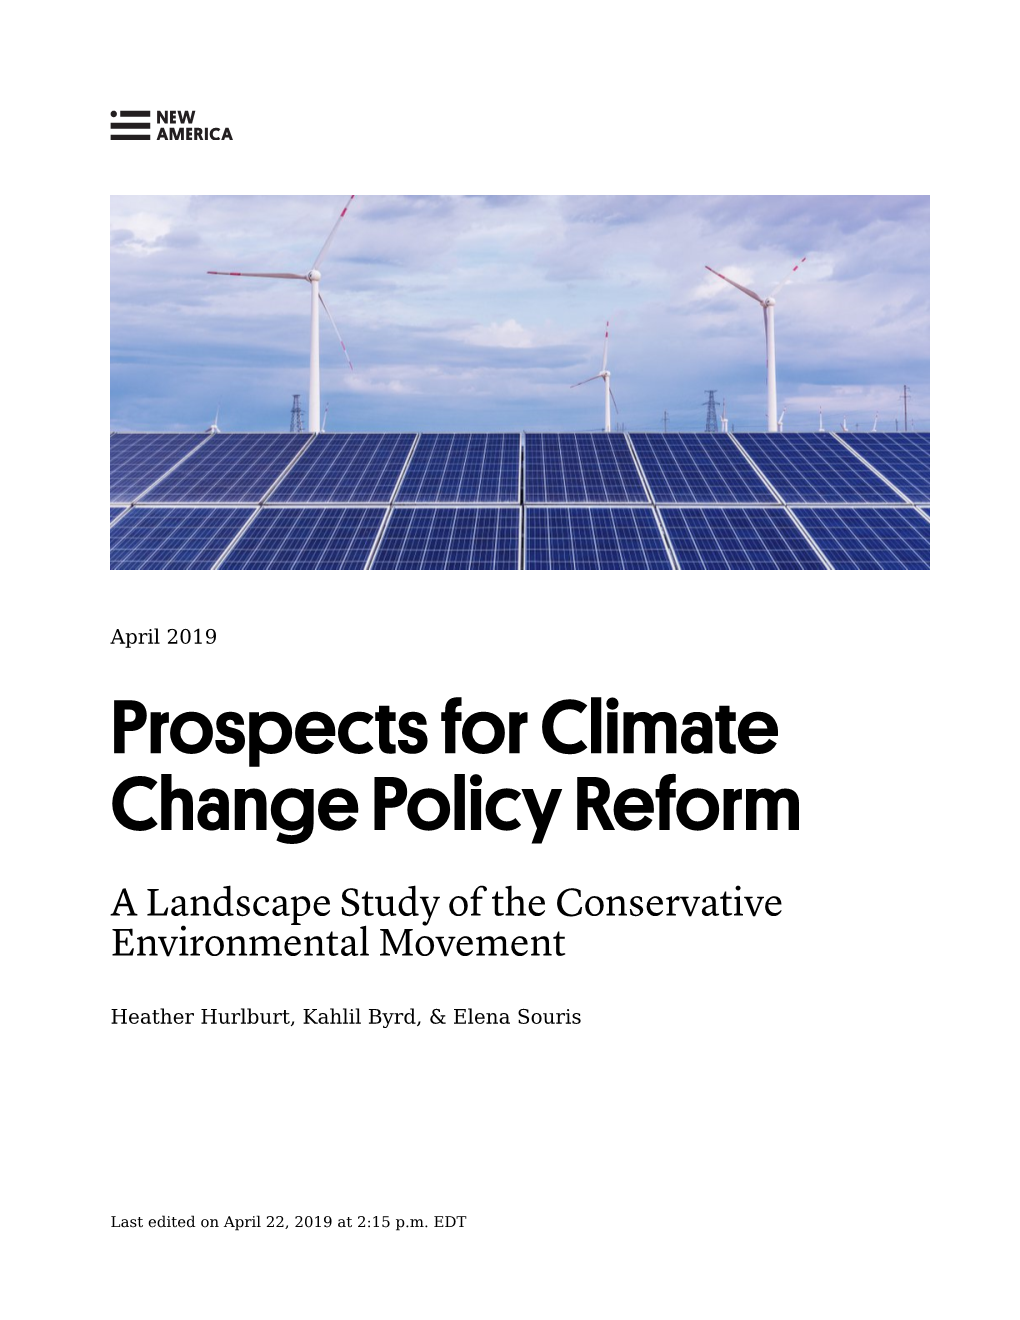 Prospects for Climate Change Policy Reform